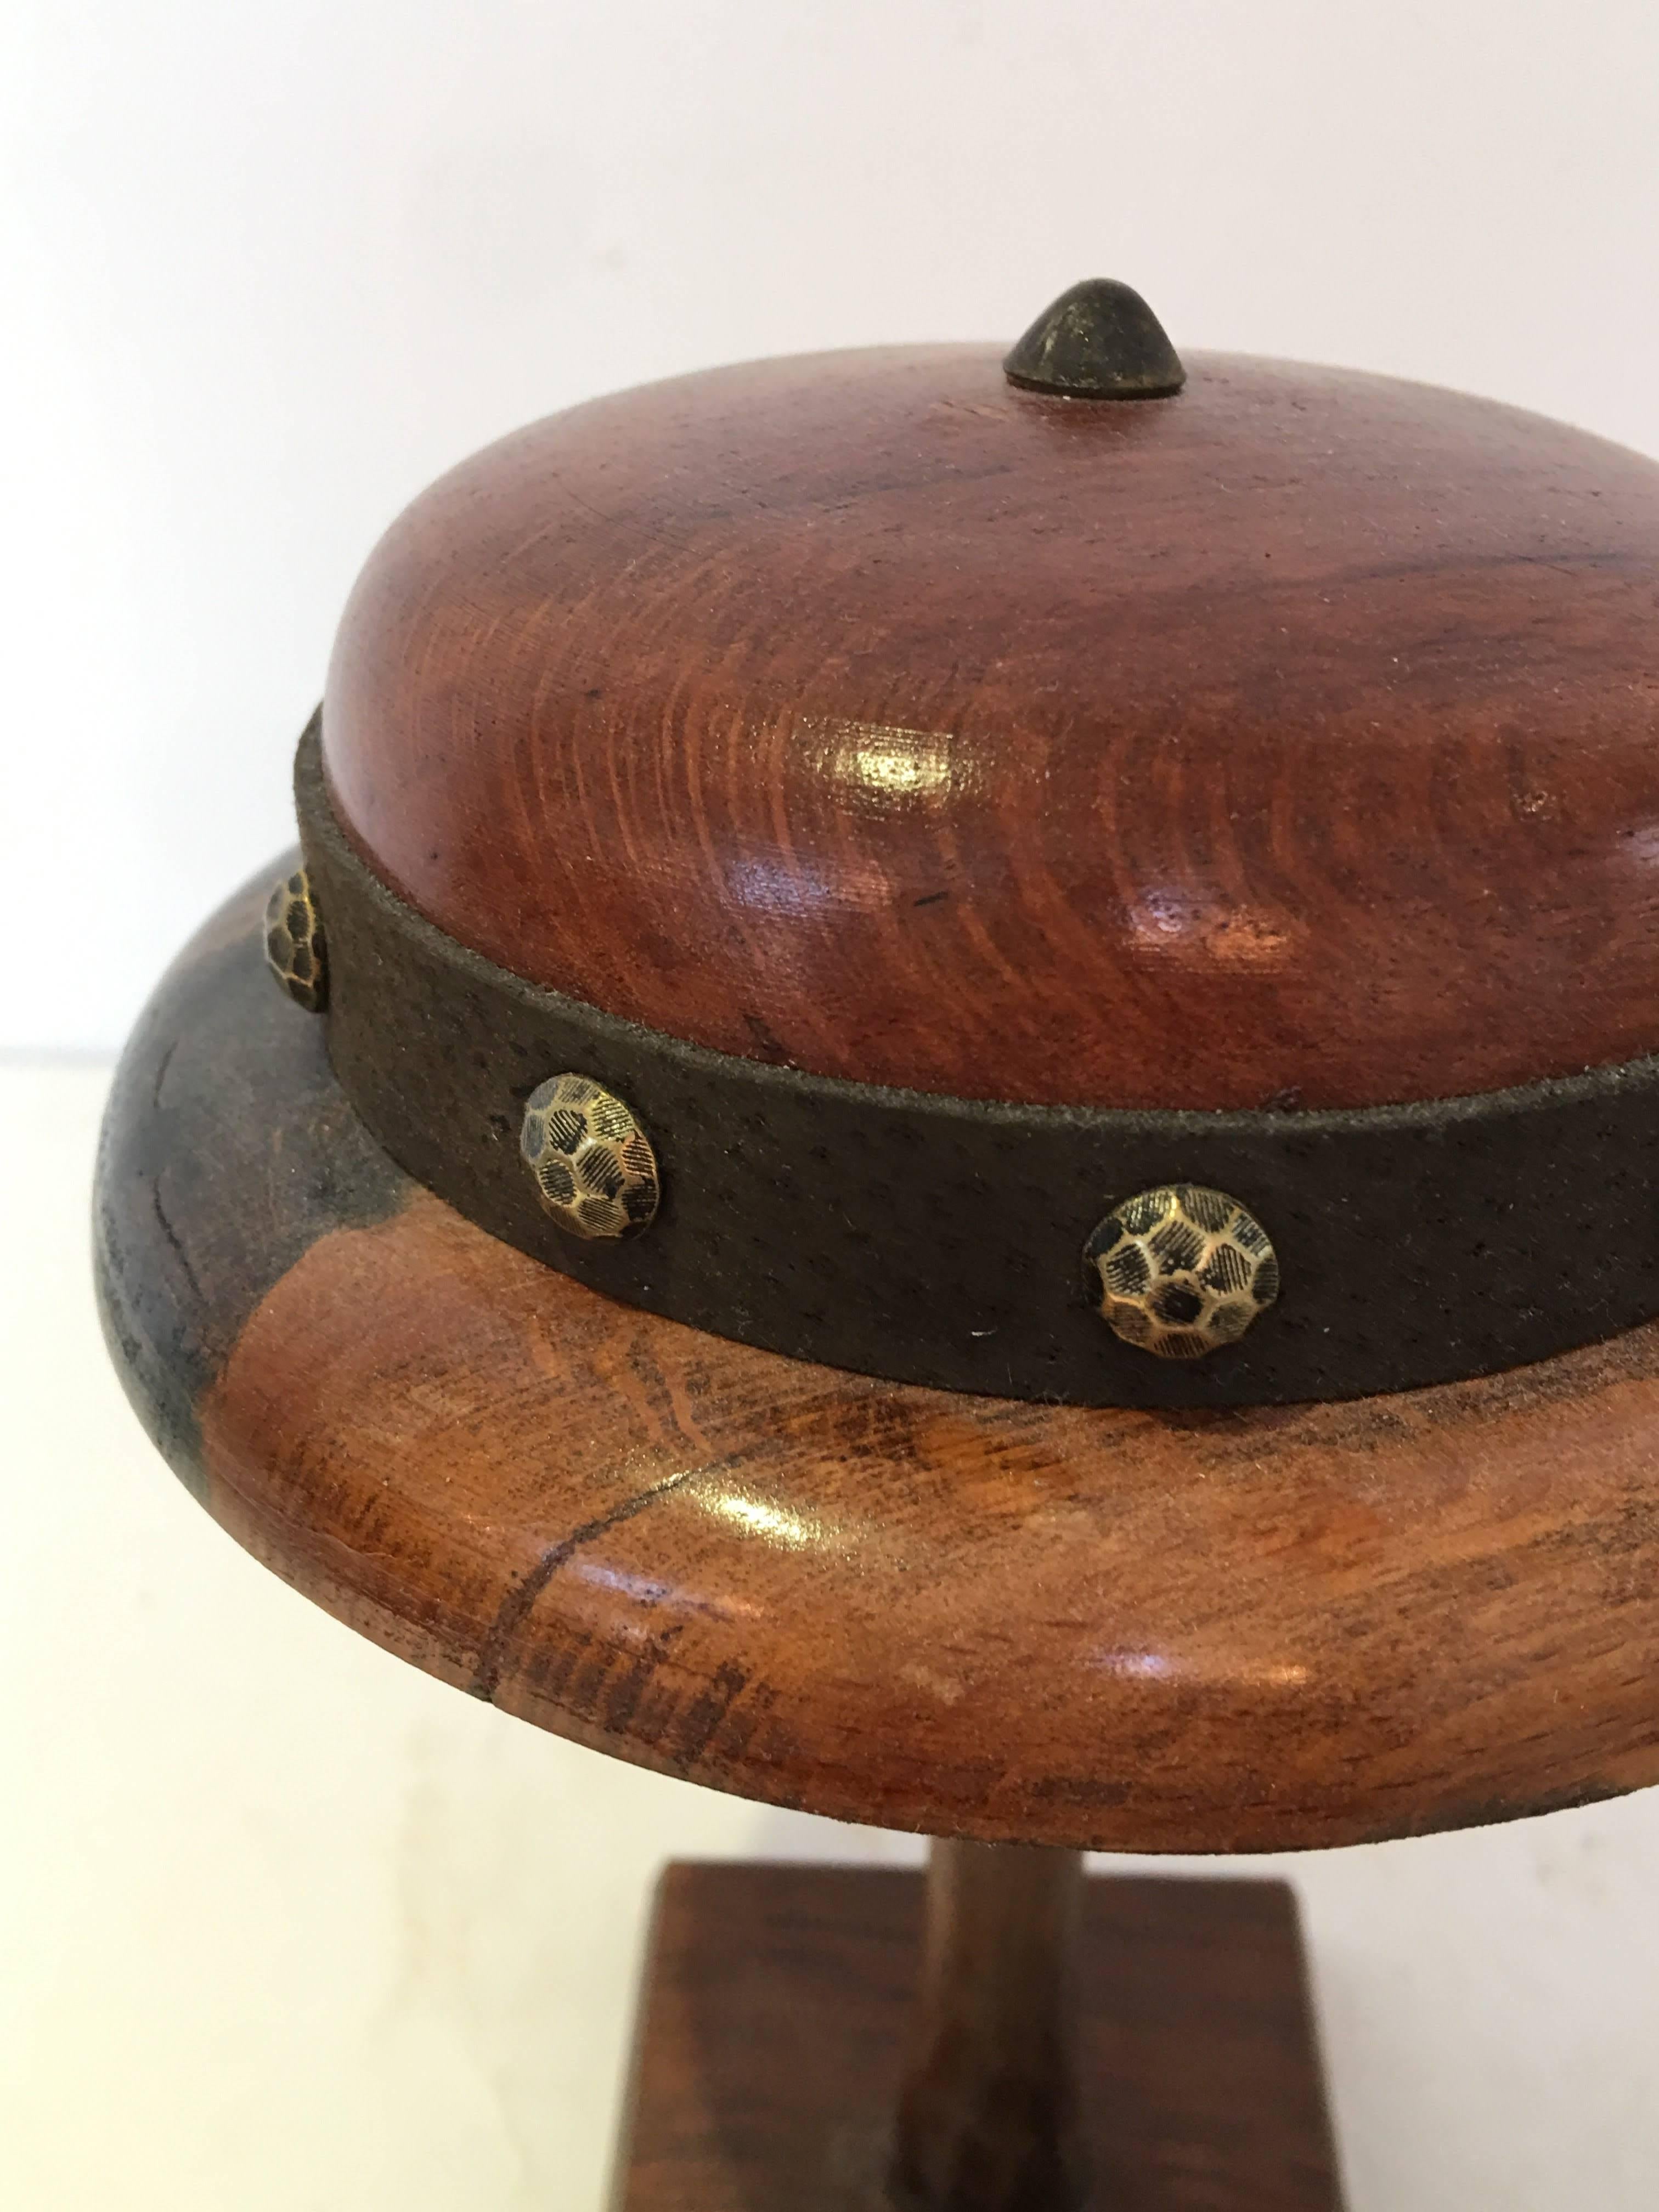 English wood doll hat mold on wood stand
circa 1920s-1930s #333
Studded Brim.